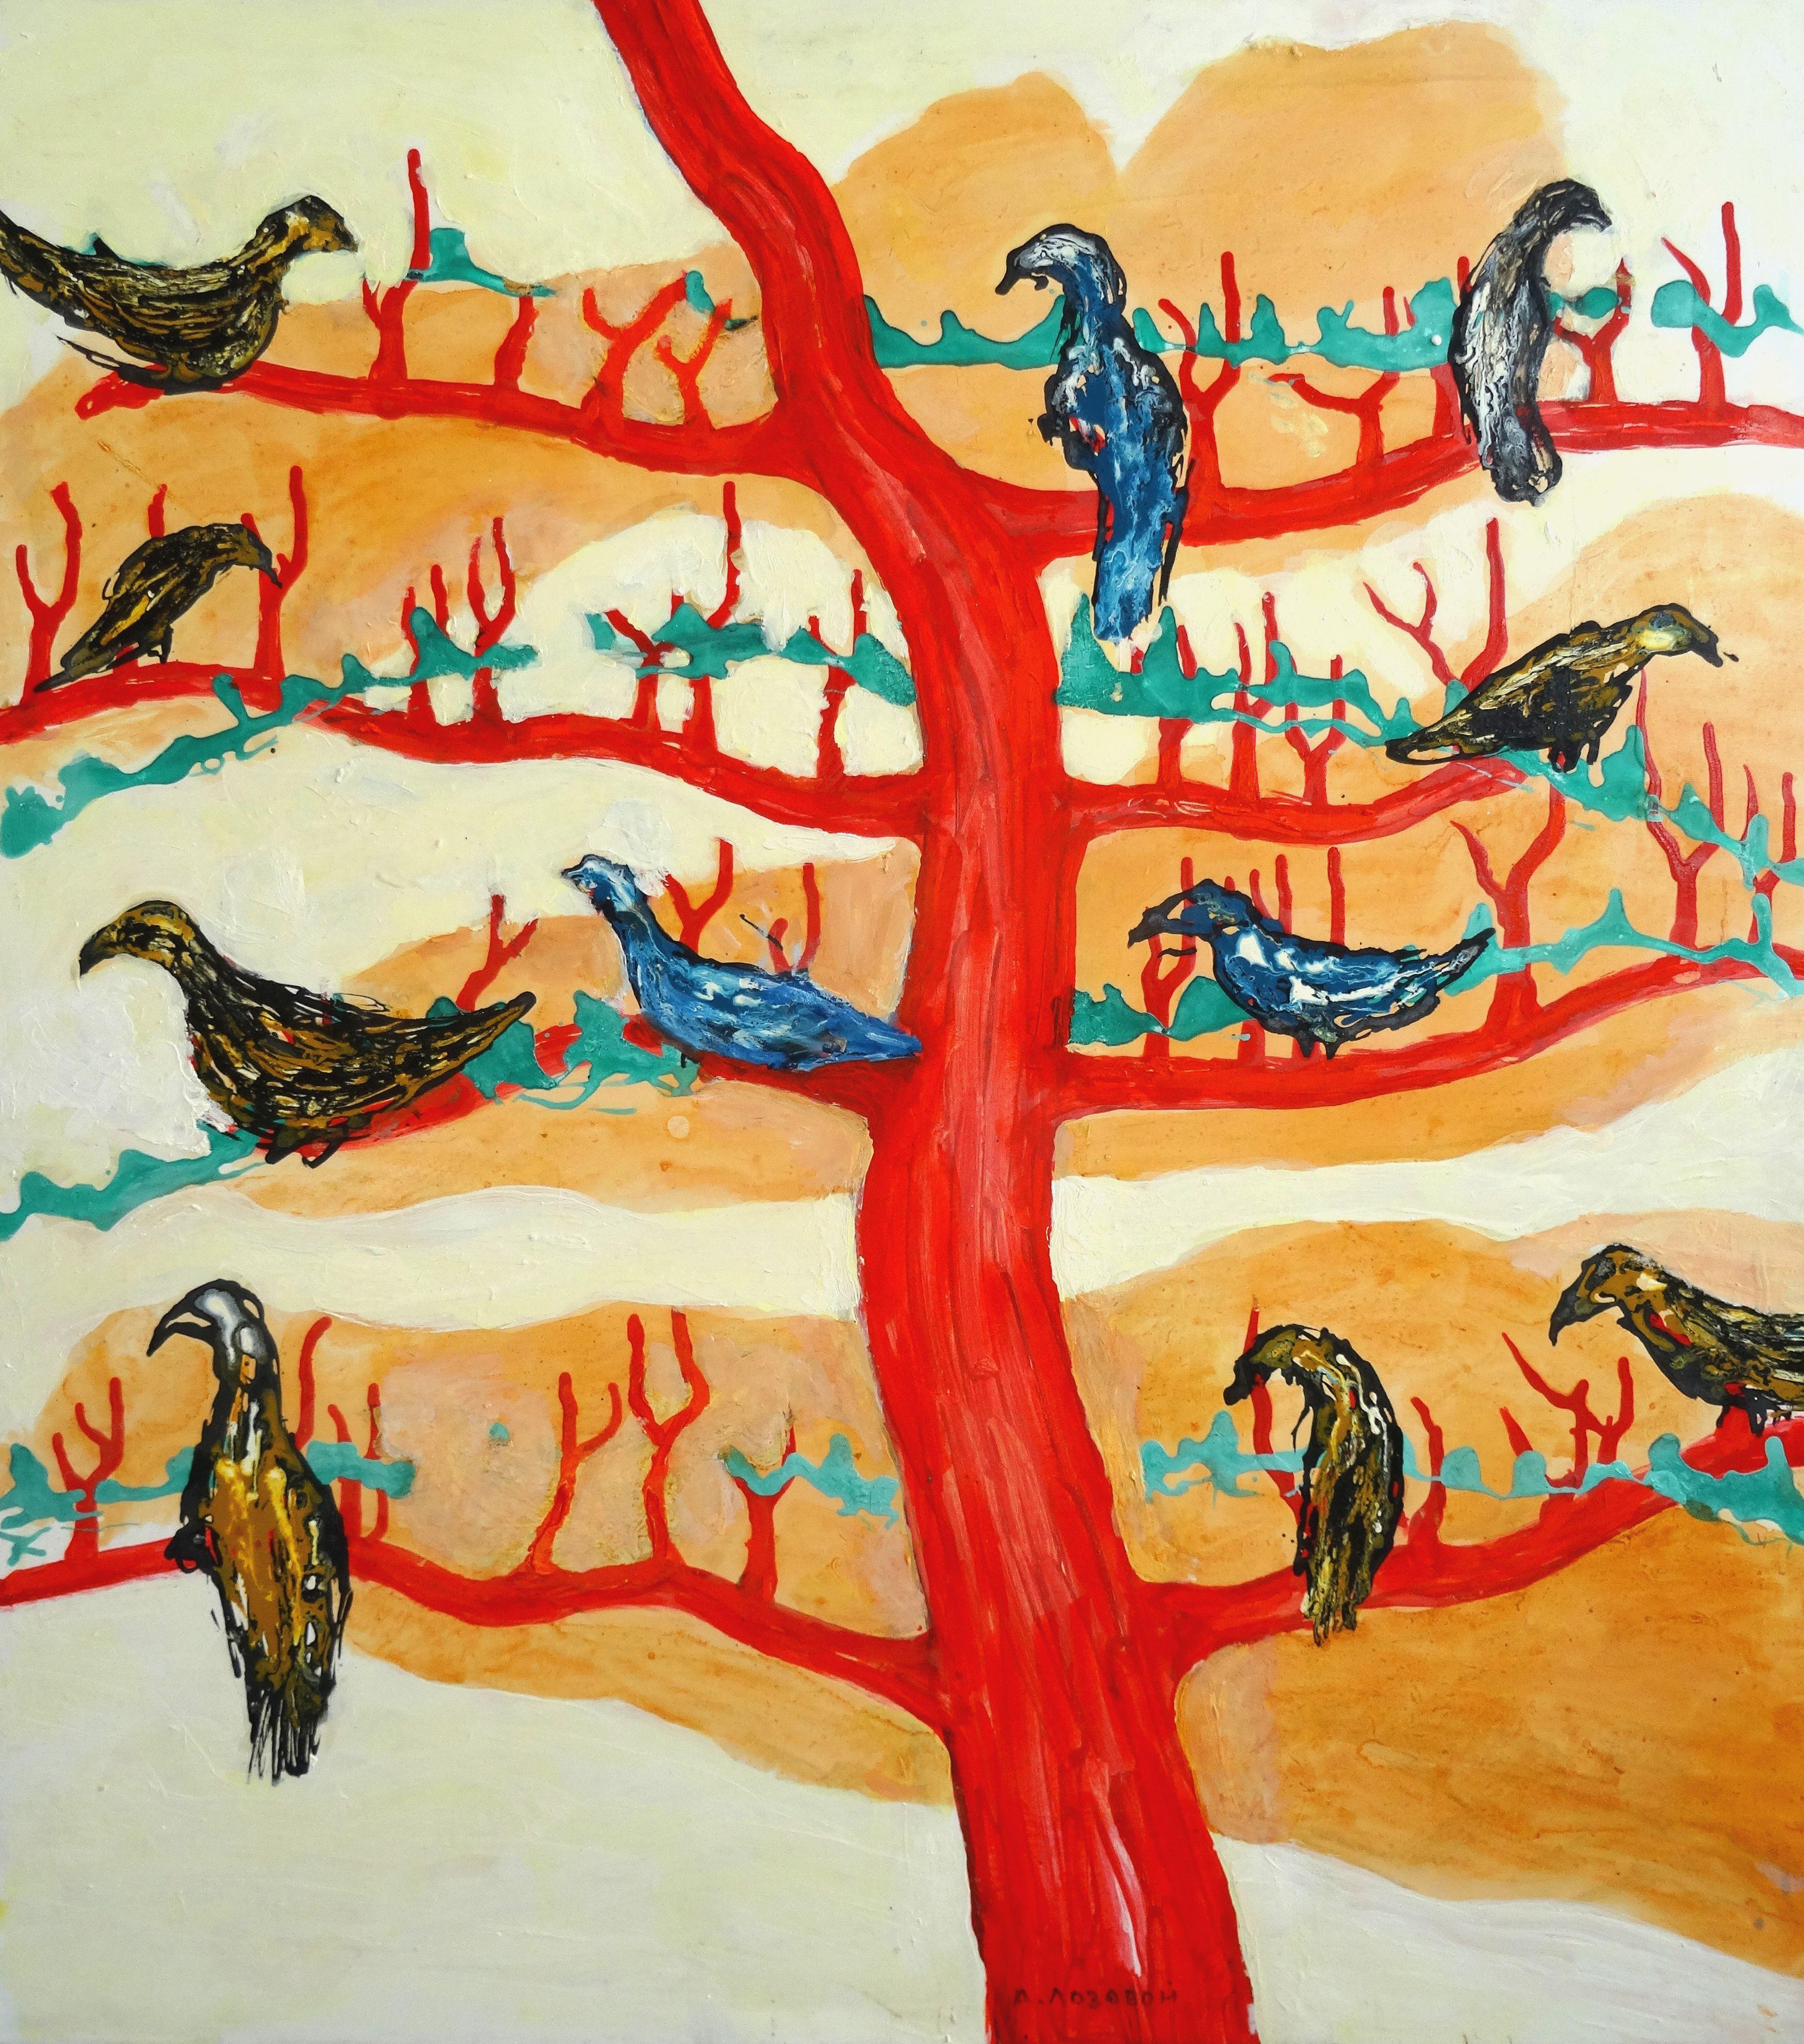 Alexander Lozovoy Animal Painting - Large and small birds on red tree. 2015. Oil on canvas, 95x85 cm